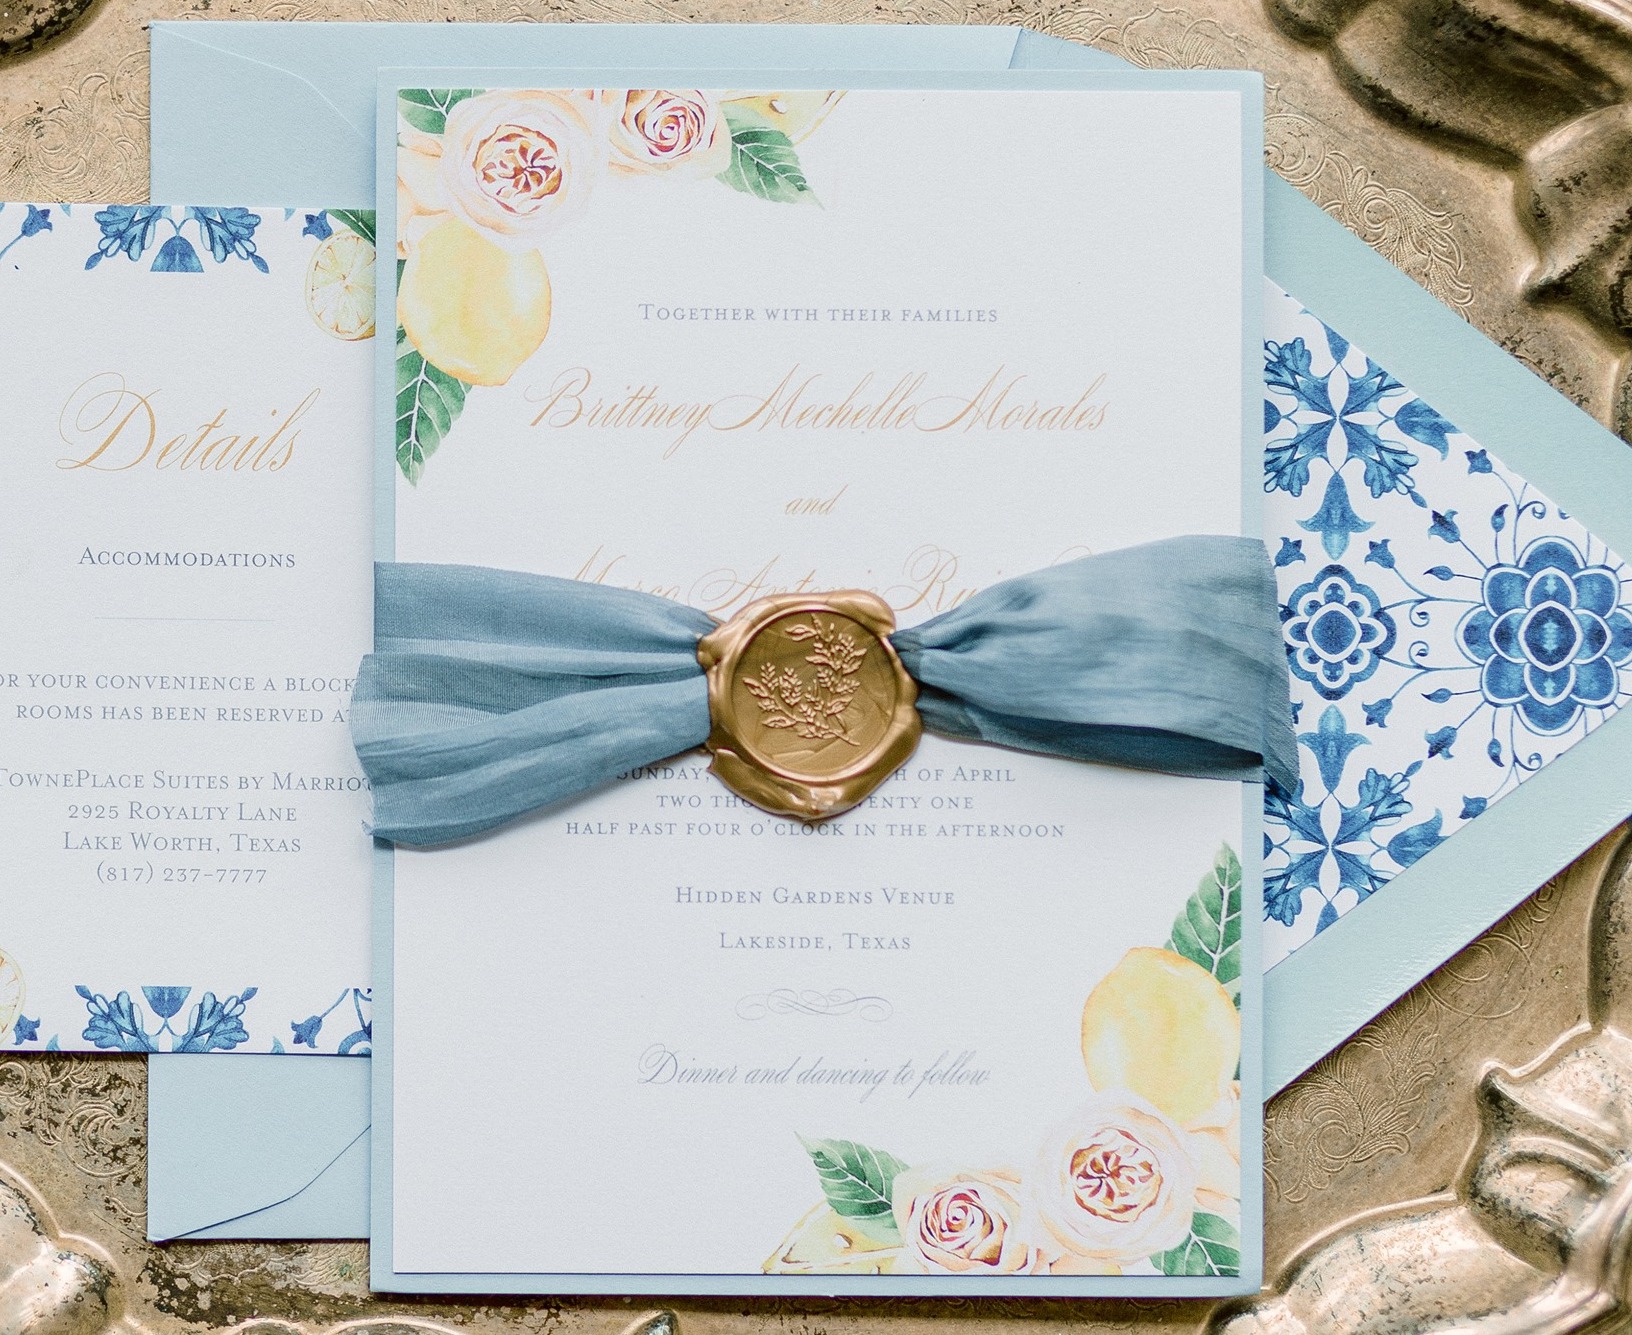 A wedding invitation suite with light blue hues and pink flowers and lemons created by Houston stationery professional, Wild Wolf Creative Co.